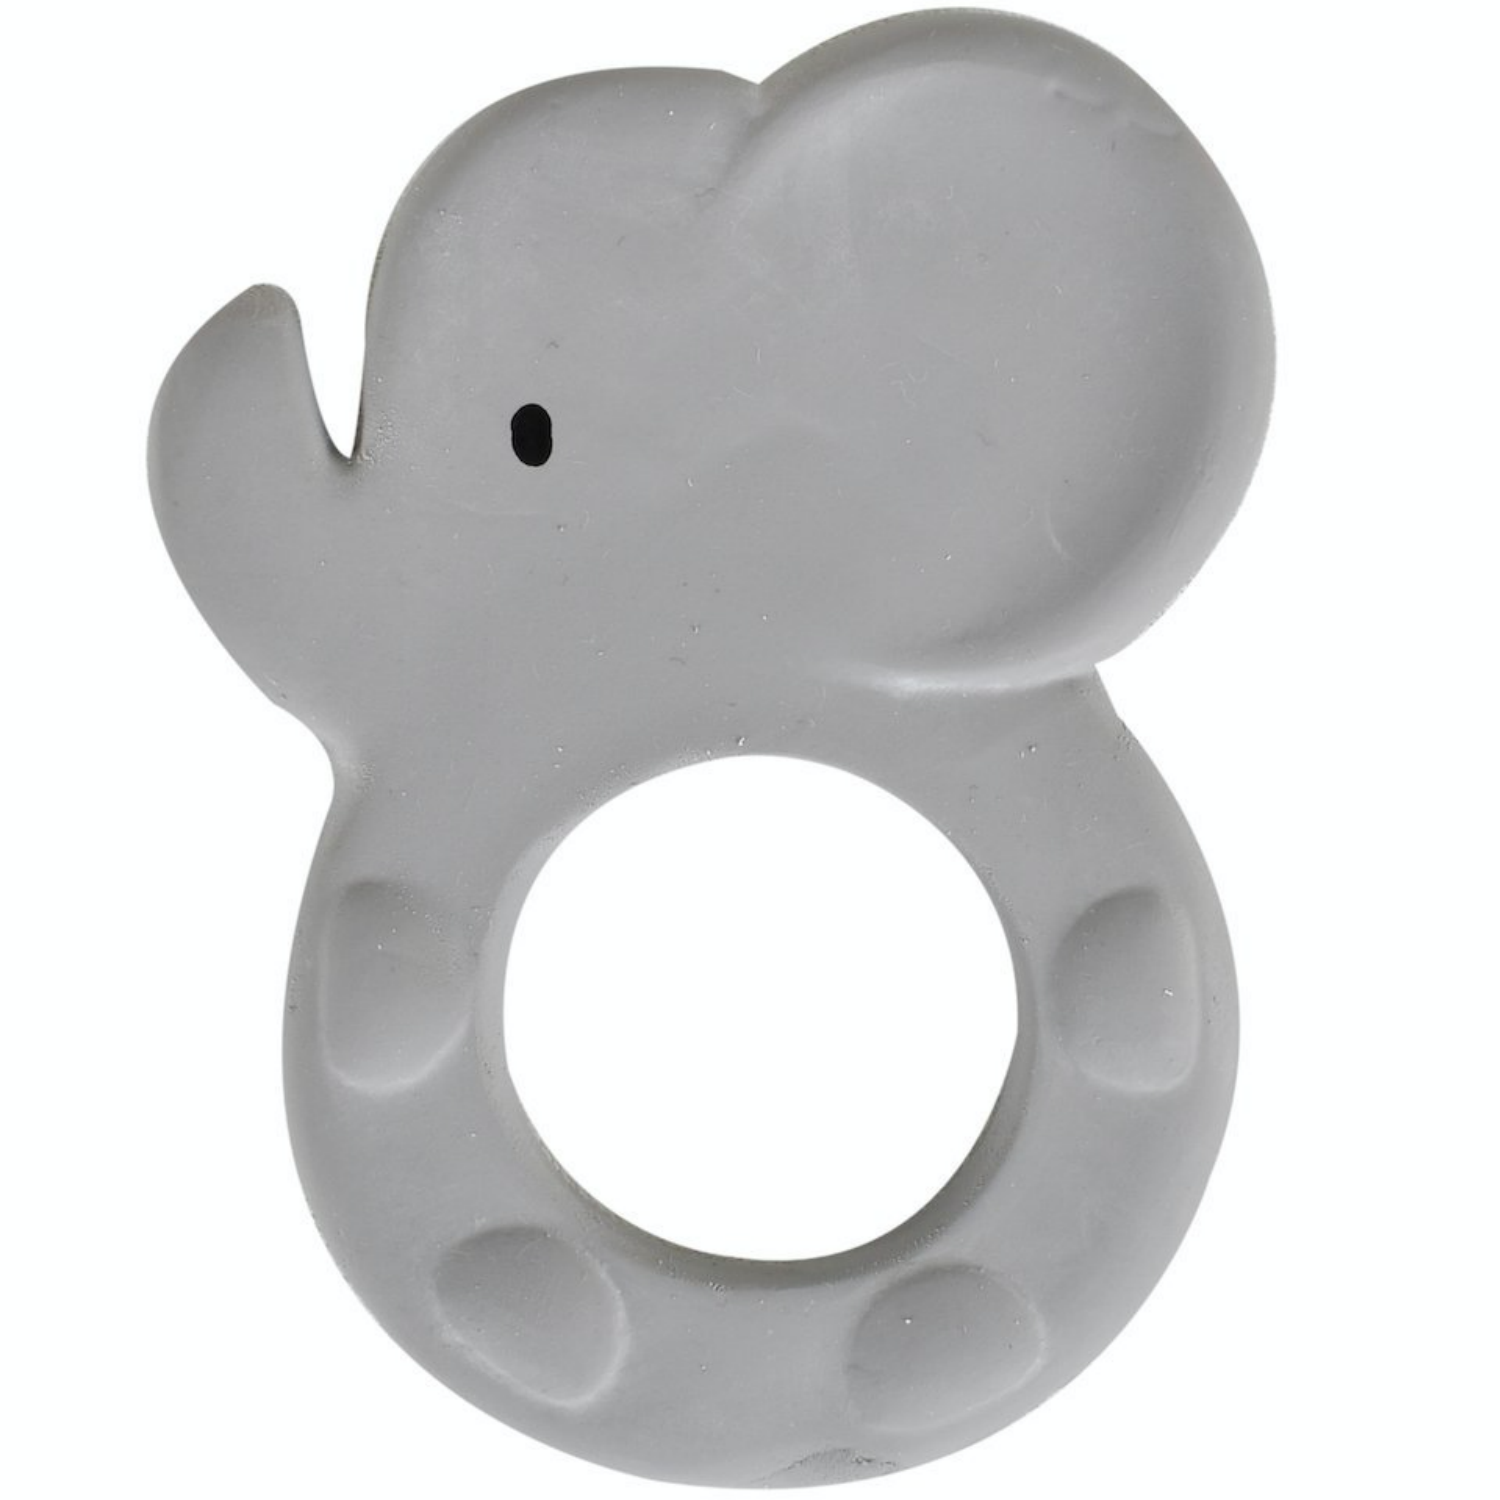 TIKIRI Natural Rubber Baby Teether ‘Elephant’ | BeoVERDE.ie